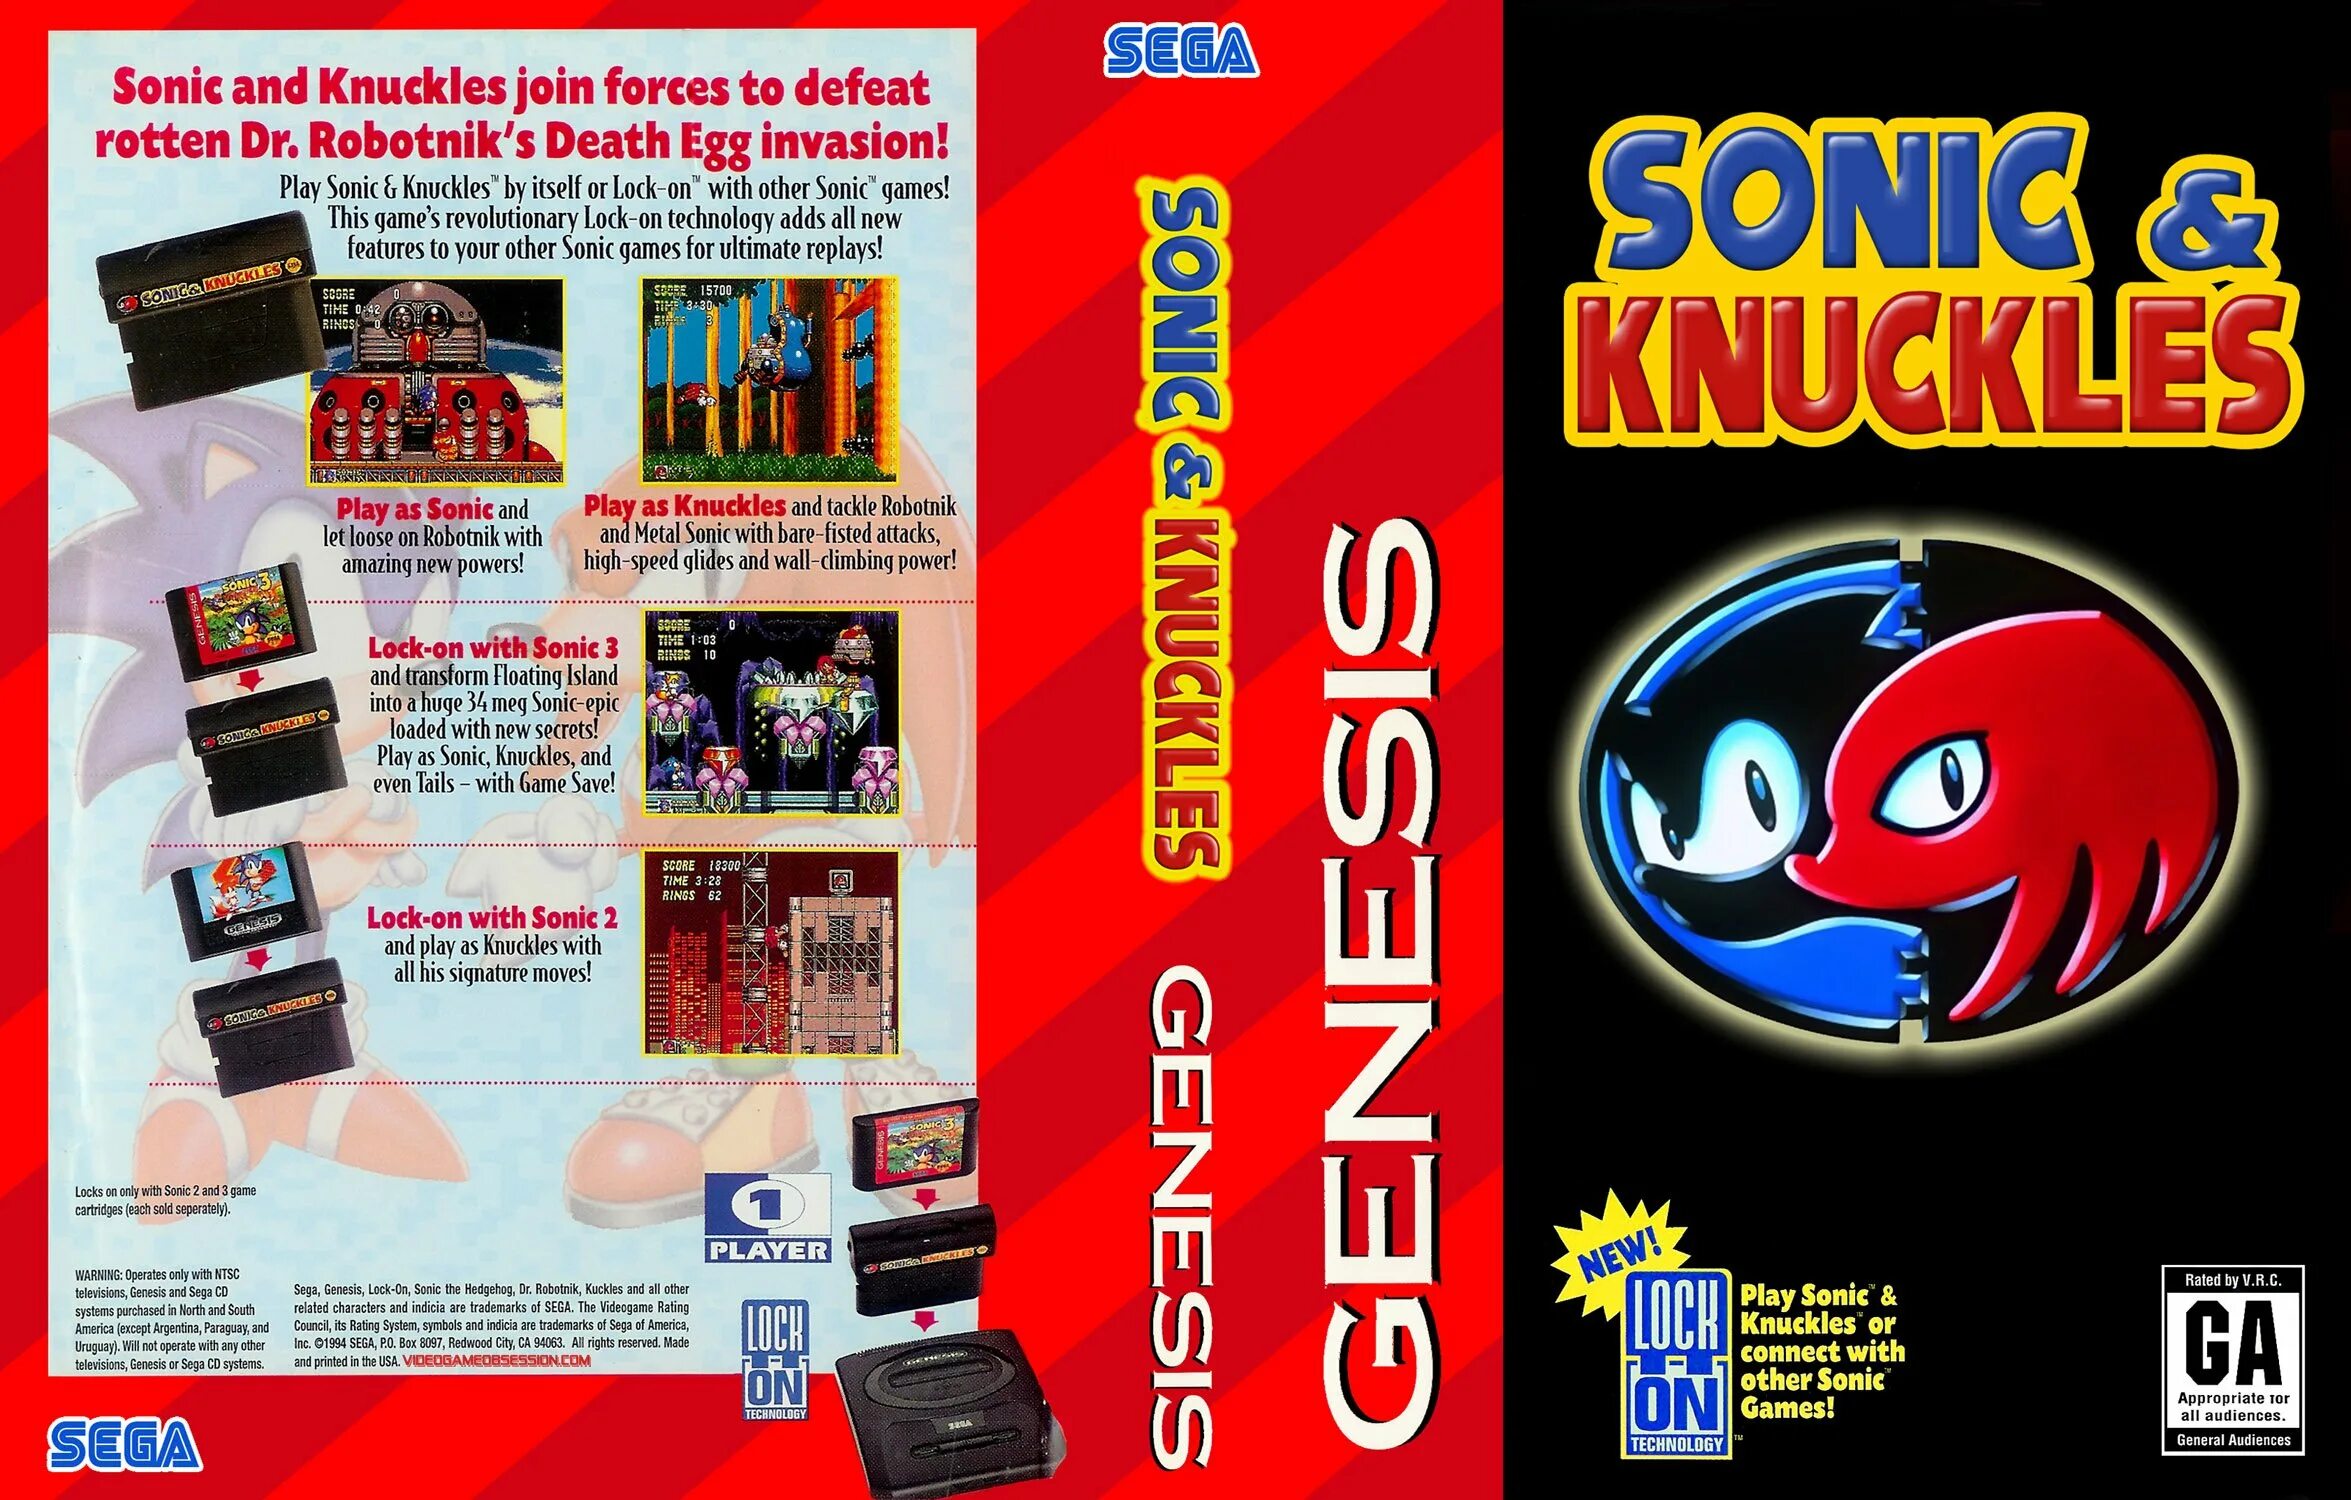 Sonic and knuckles download. Картридж Sonic and Knuckles для Sega Mega Drive 2. Картридж Sonic 2 and Knuckles для Sega Mega Drive 2. Sonic Knuckles Sega картридж. Sonic and Knuckles картридж для сеги.